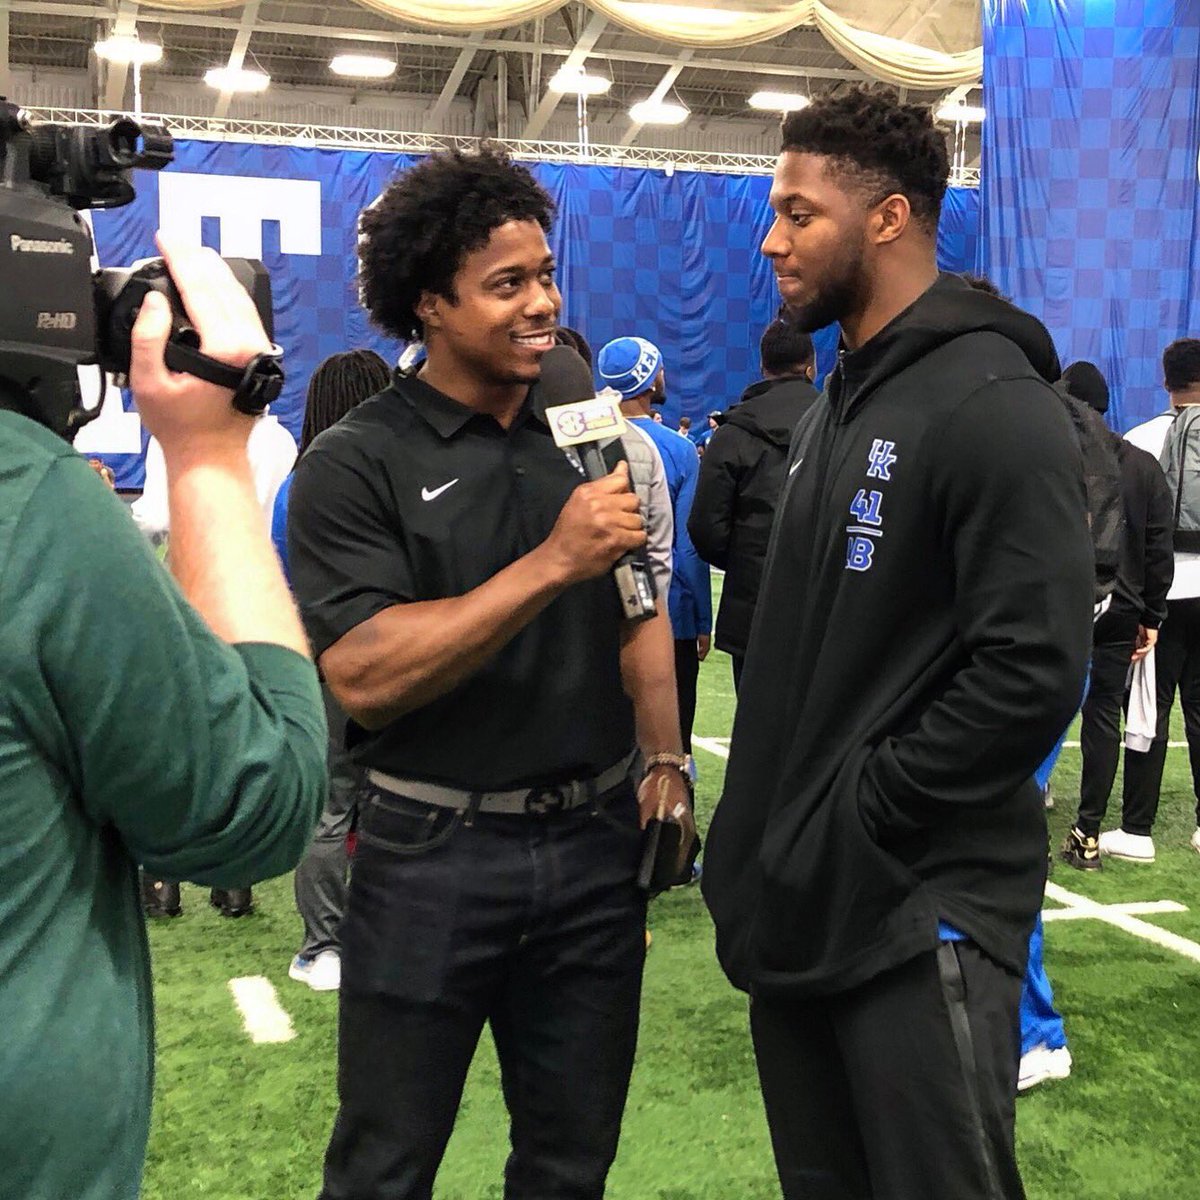 Practicing for that 2nd career!!! “Caption This?” 🤔 #UkProDay